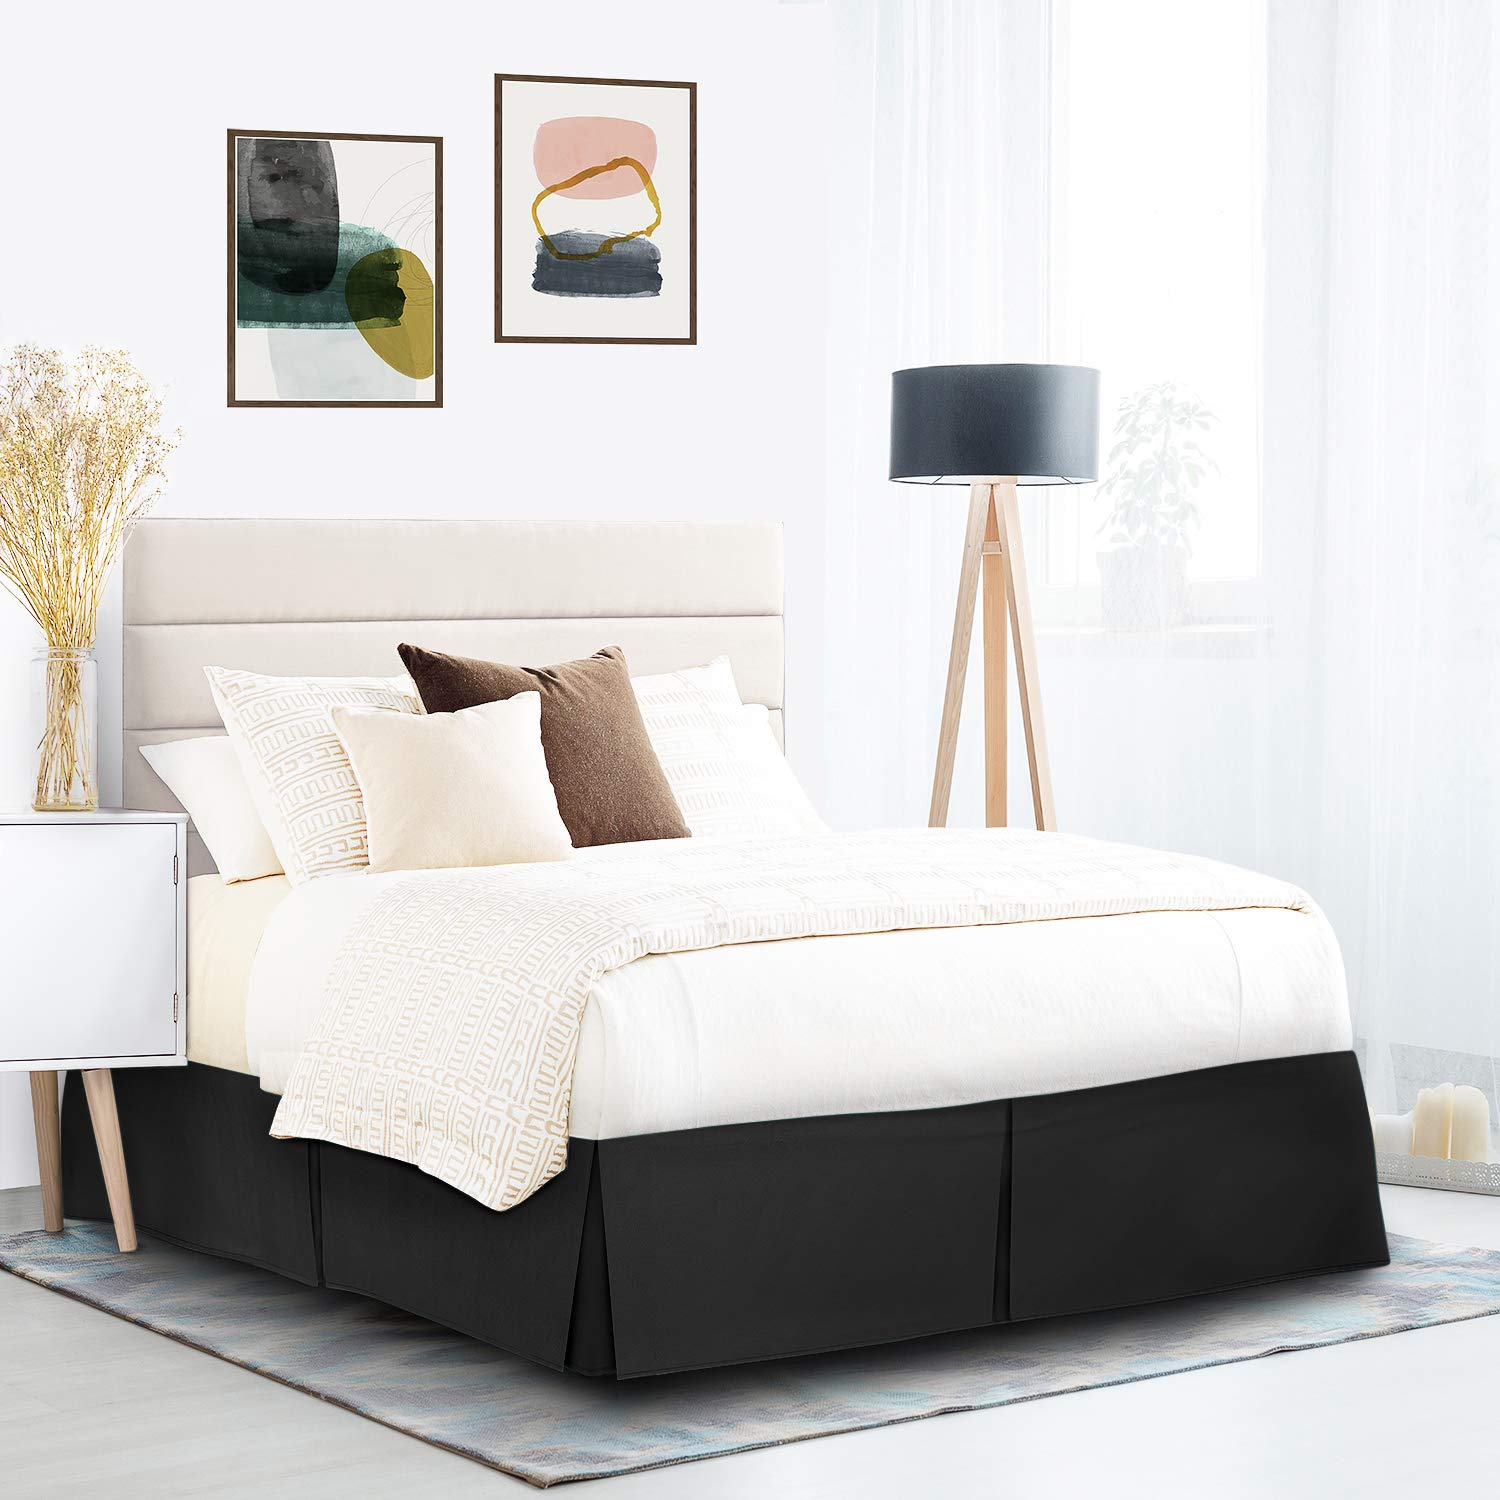 Book Cover Nestl Black Bed Skirt King Size - King Bed Skirt 14 Inch Drop - Brushed Microfiber Bed Skirts - Hotel Quality Pleated Bed Skirt - Shrinkage & Fade Resistant King Black